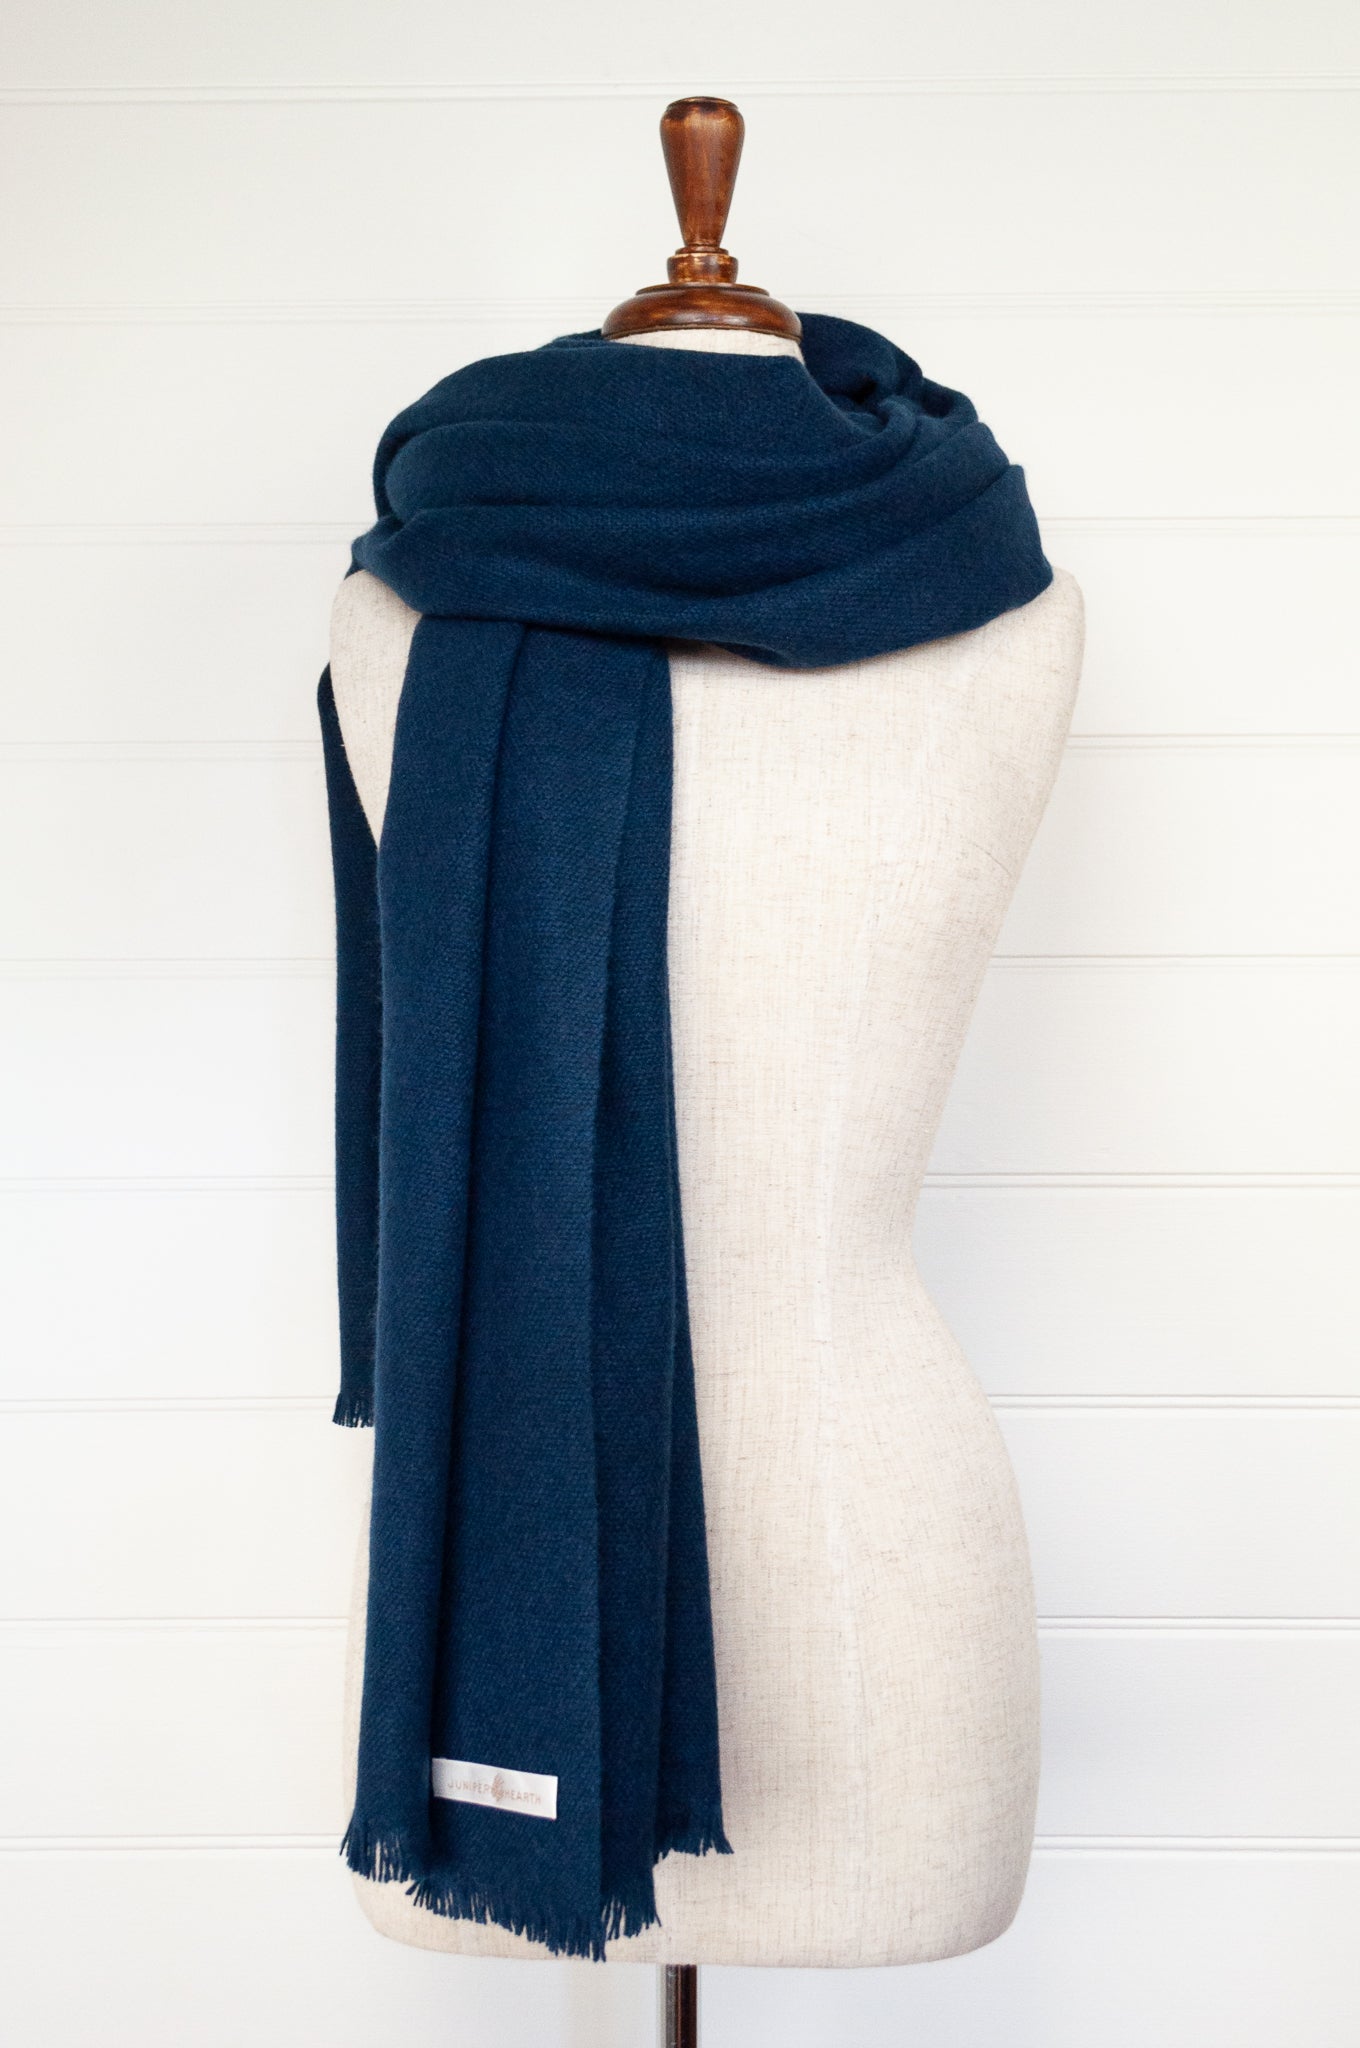 Juniper Hearth baby yak wool handwoven wrap or shawl with fringe on ends, in French navy blue, 100x200cm.